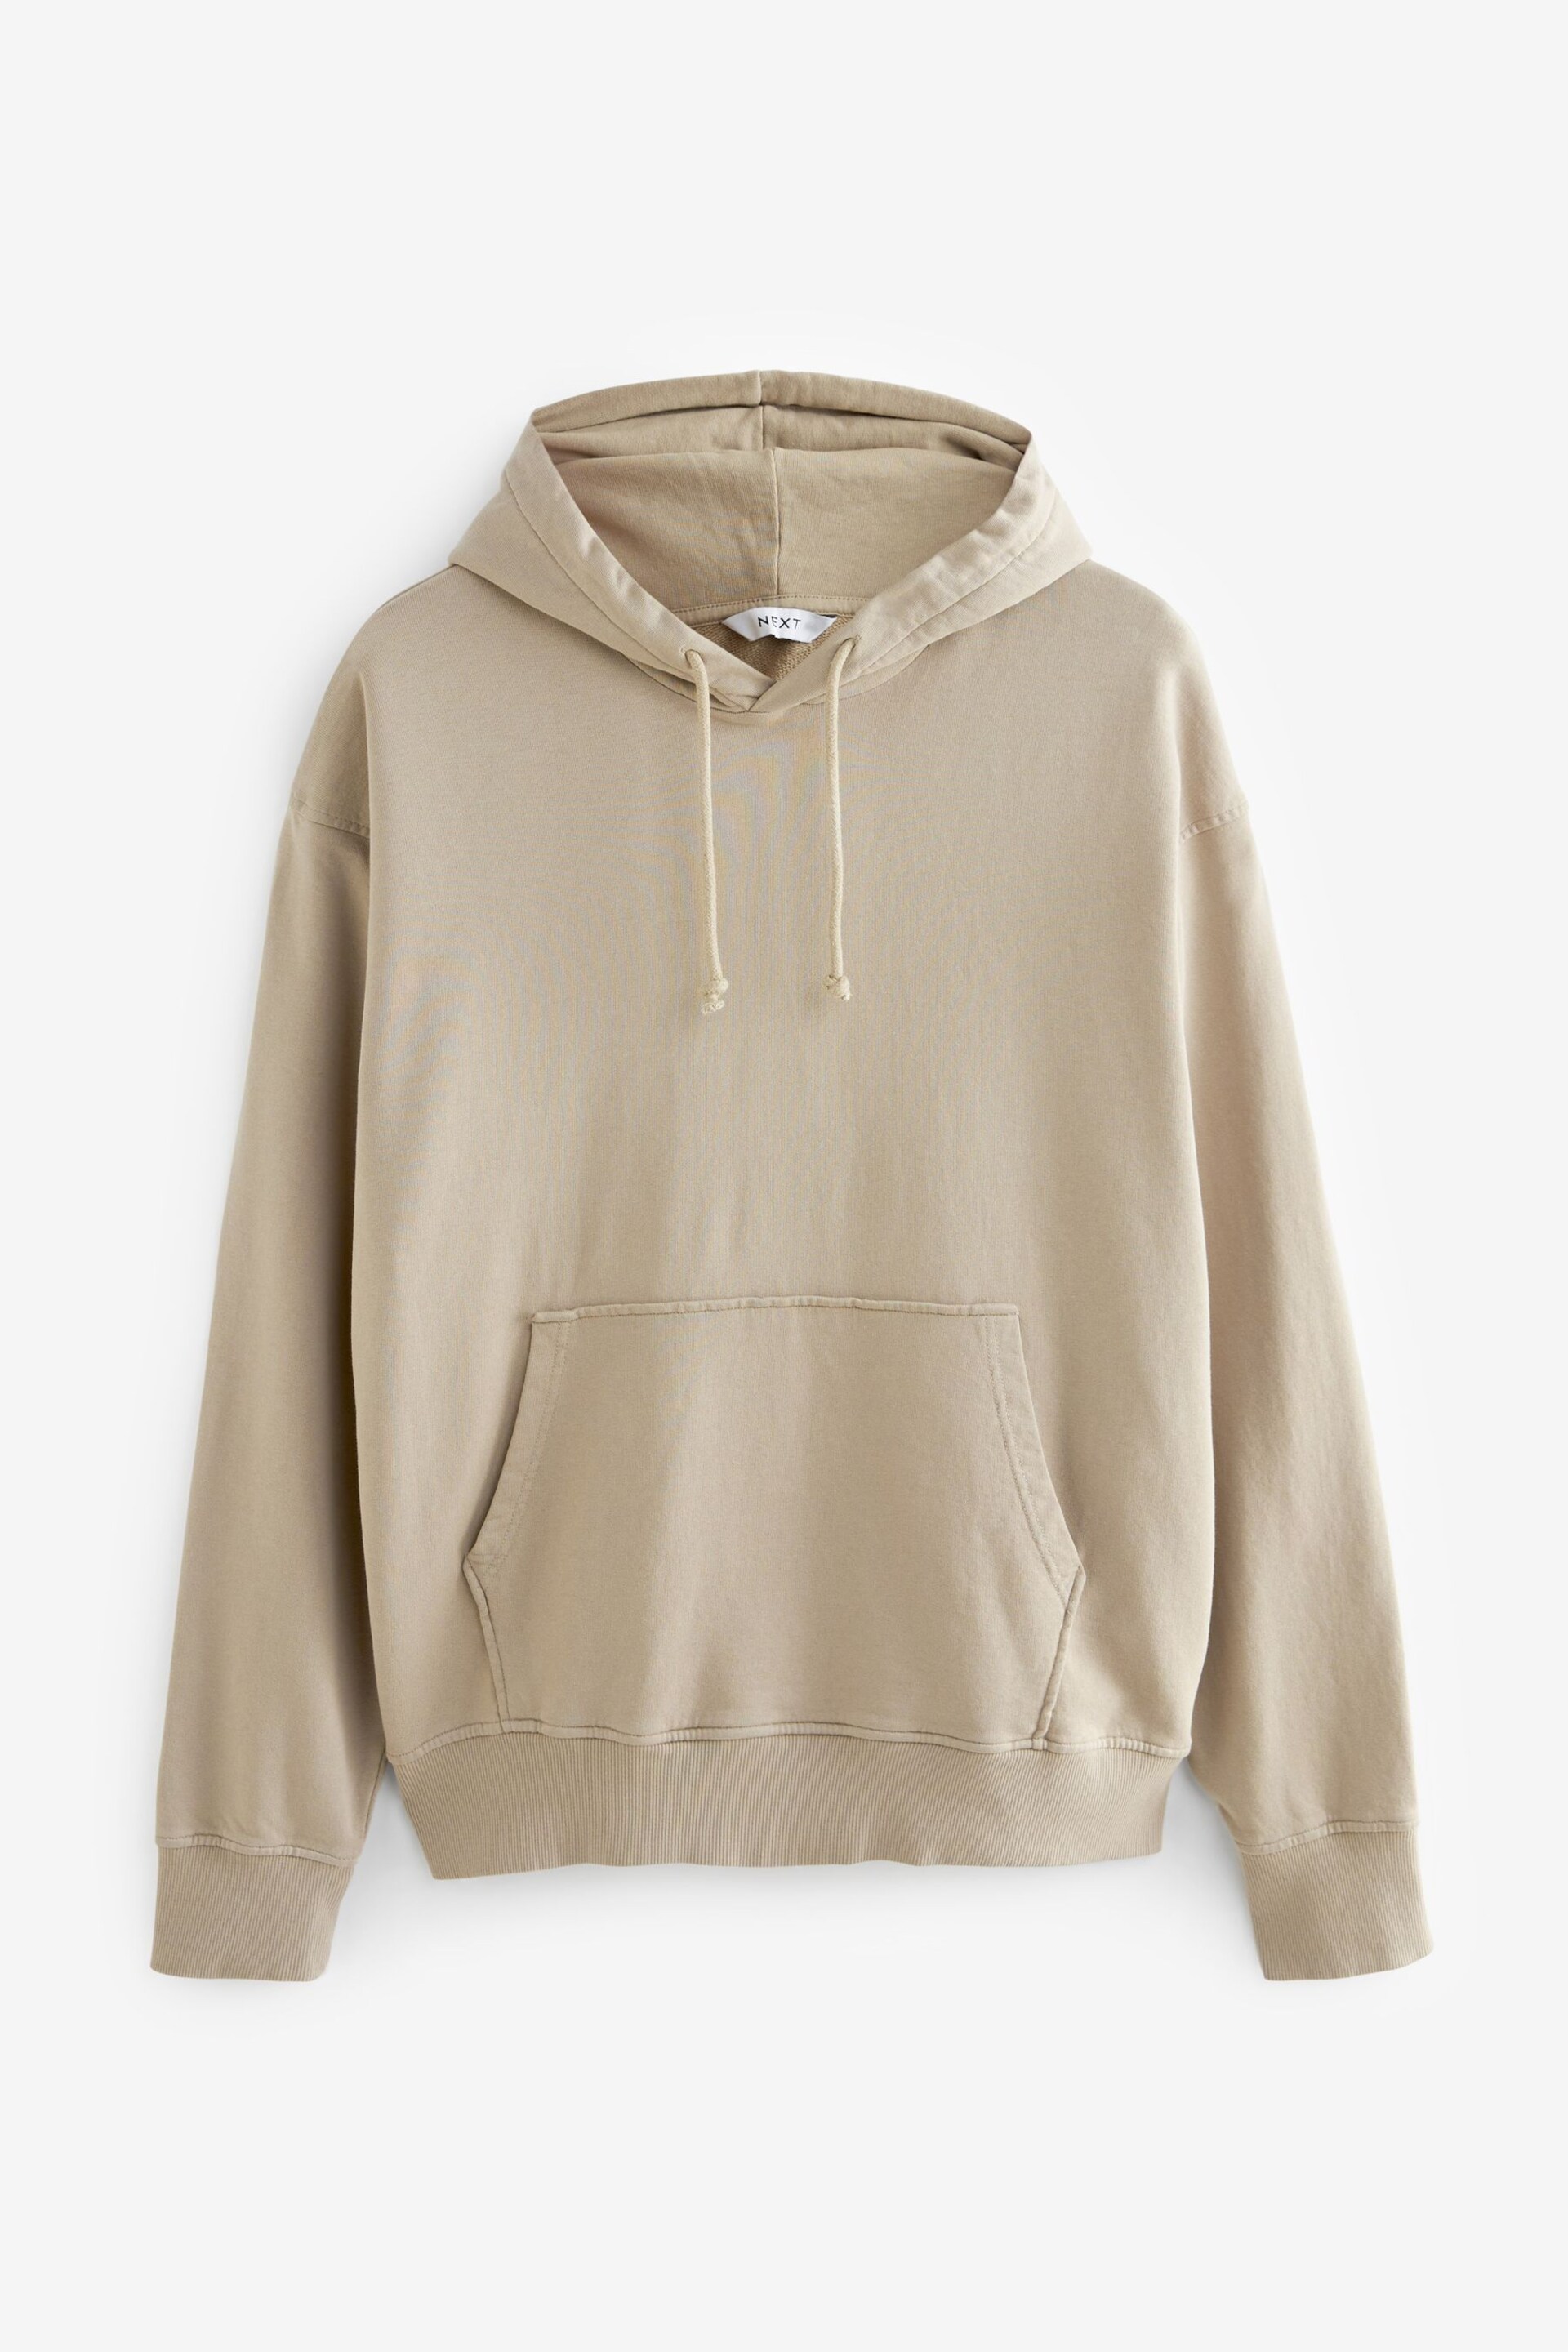 Stone Cream Garment Washed Hoodie - Image 7 of 9